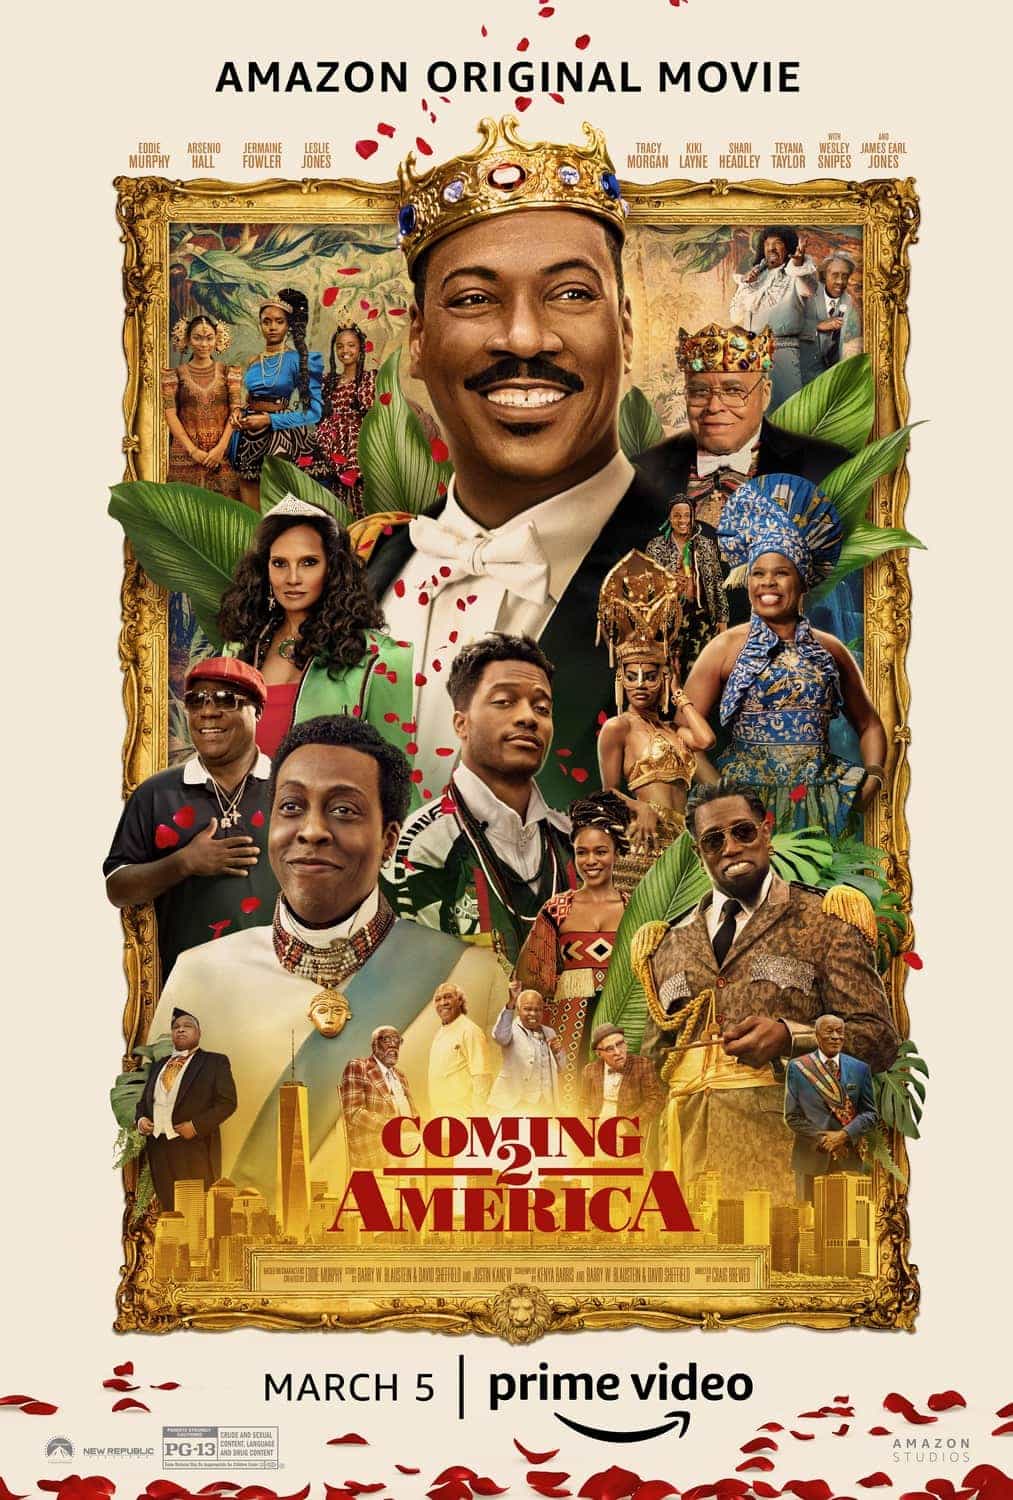 New poster release for Coming 2 America starring Eddie Murphy - movie release date 5th March 2021